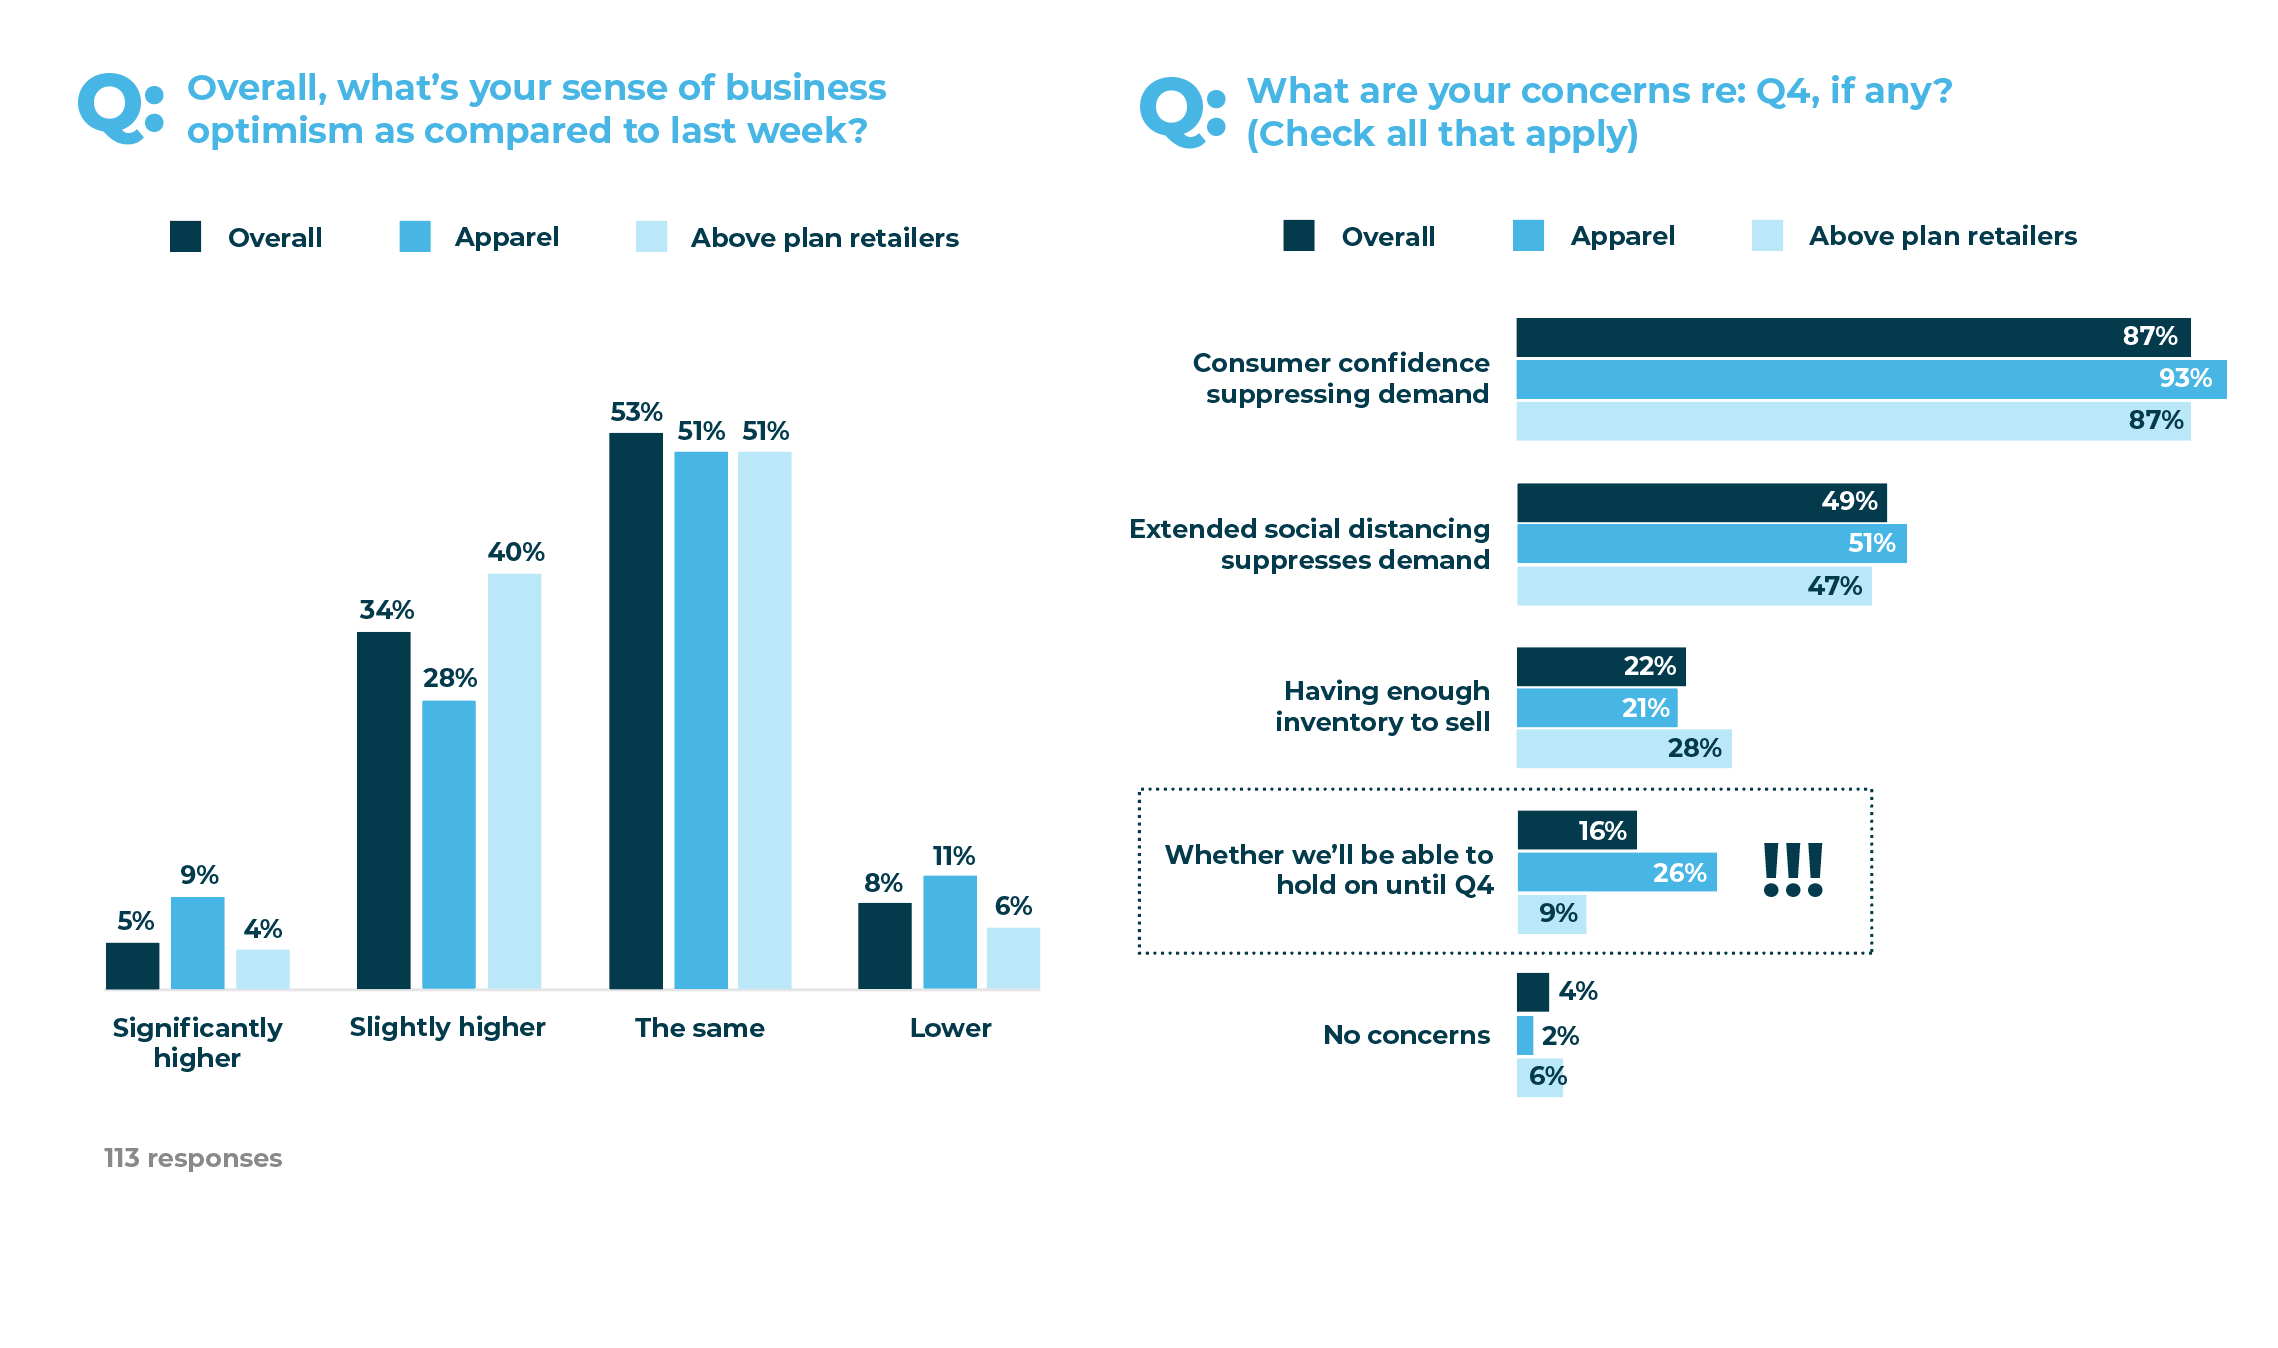 Overall, what is your sense of business optimism as compared to last week, and what are your concerns about Q4?